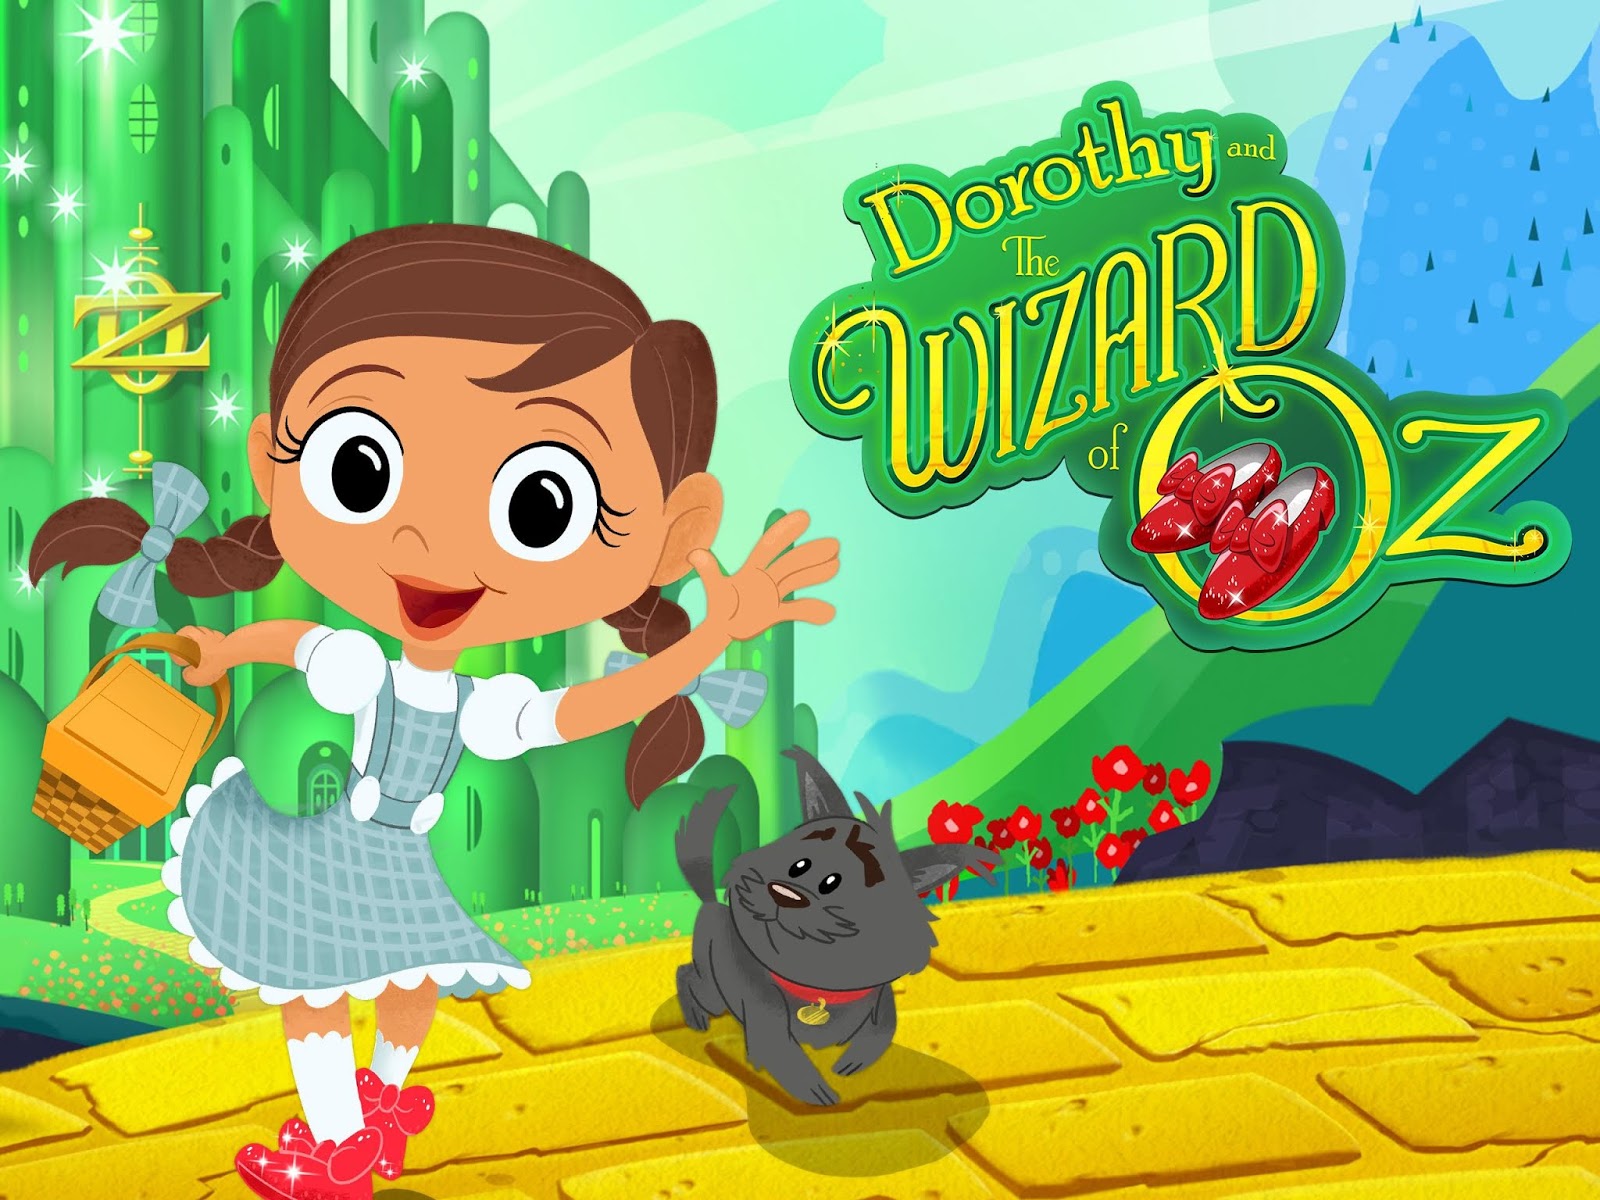 Dorothy and The Wizard of Oz on DVD.